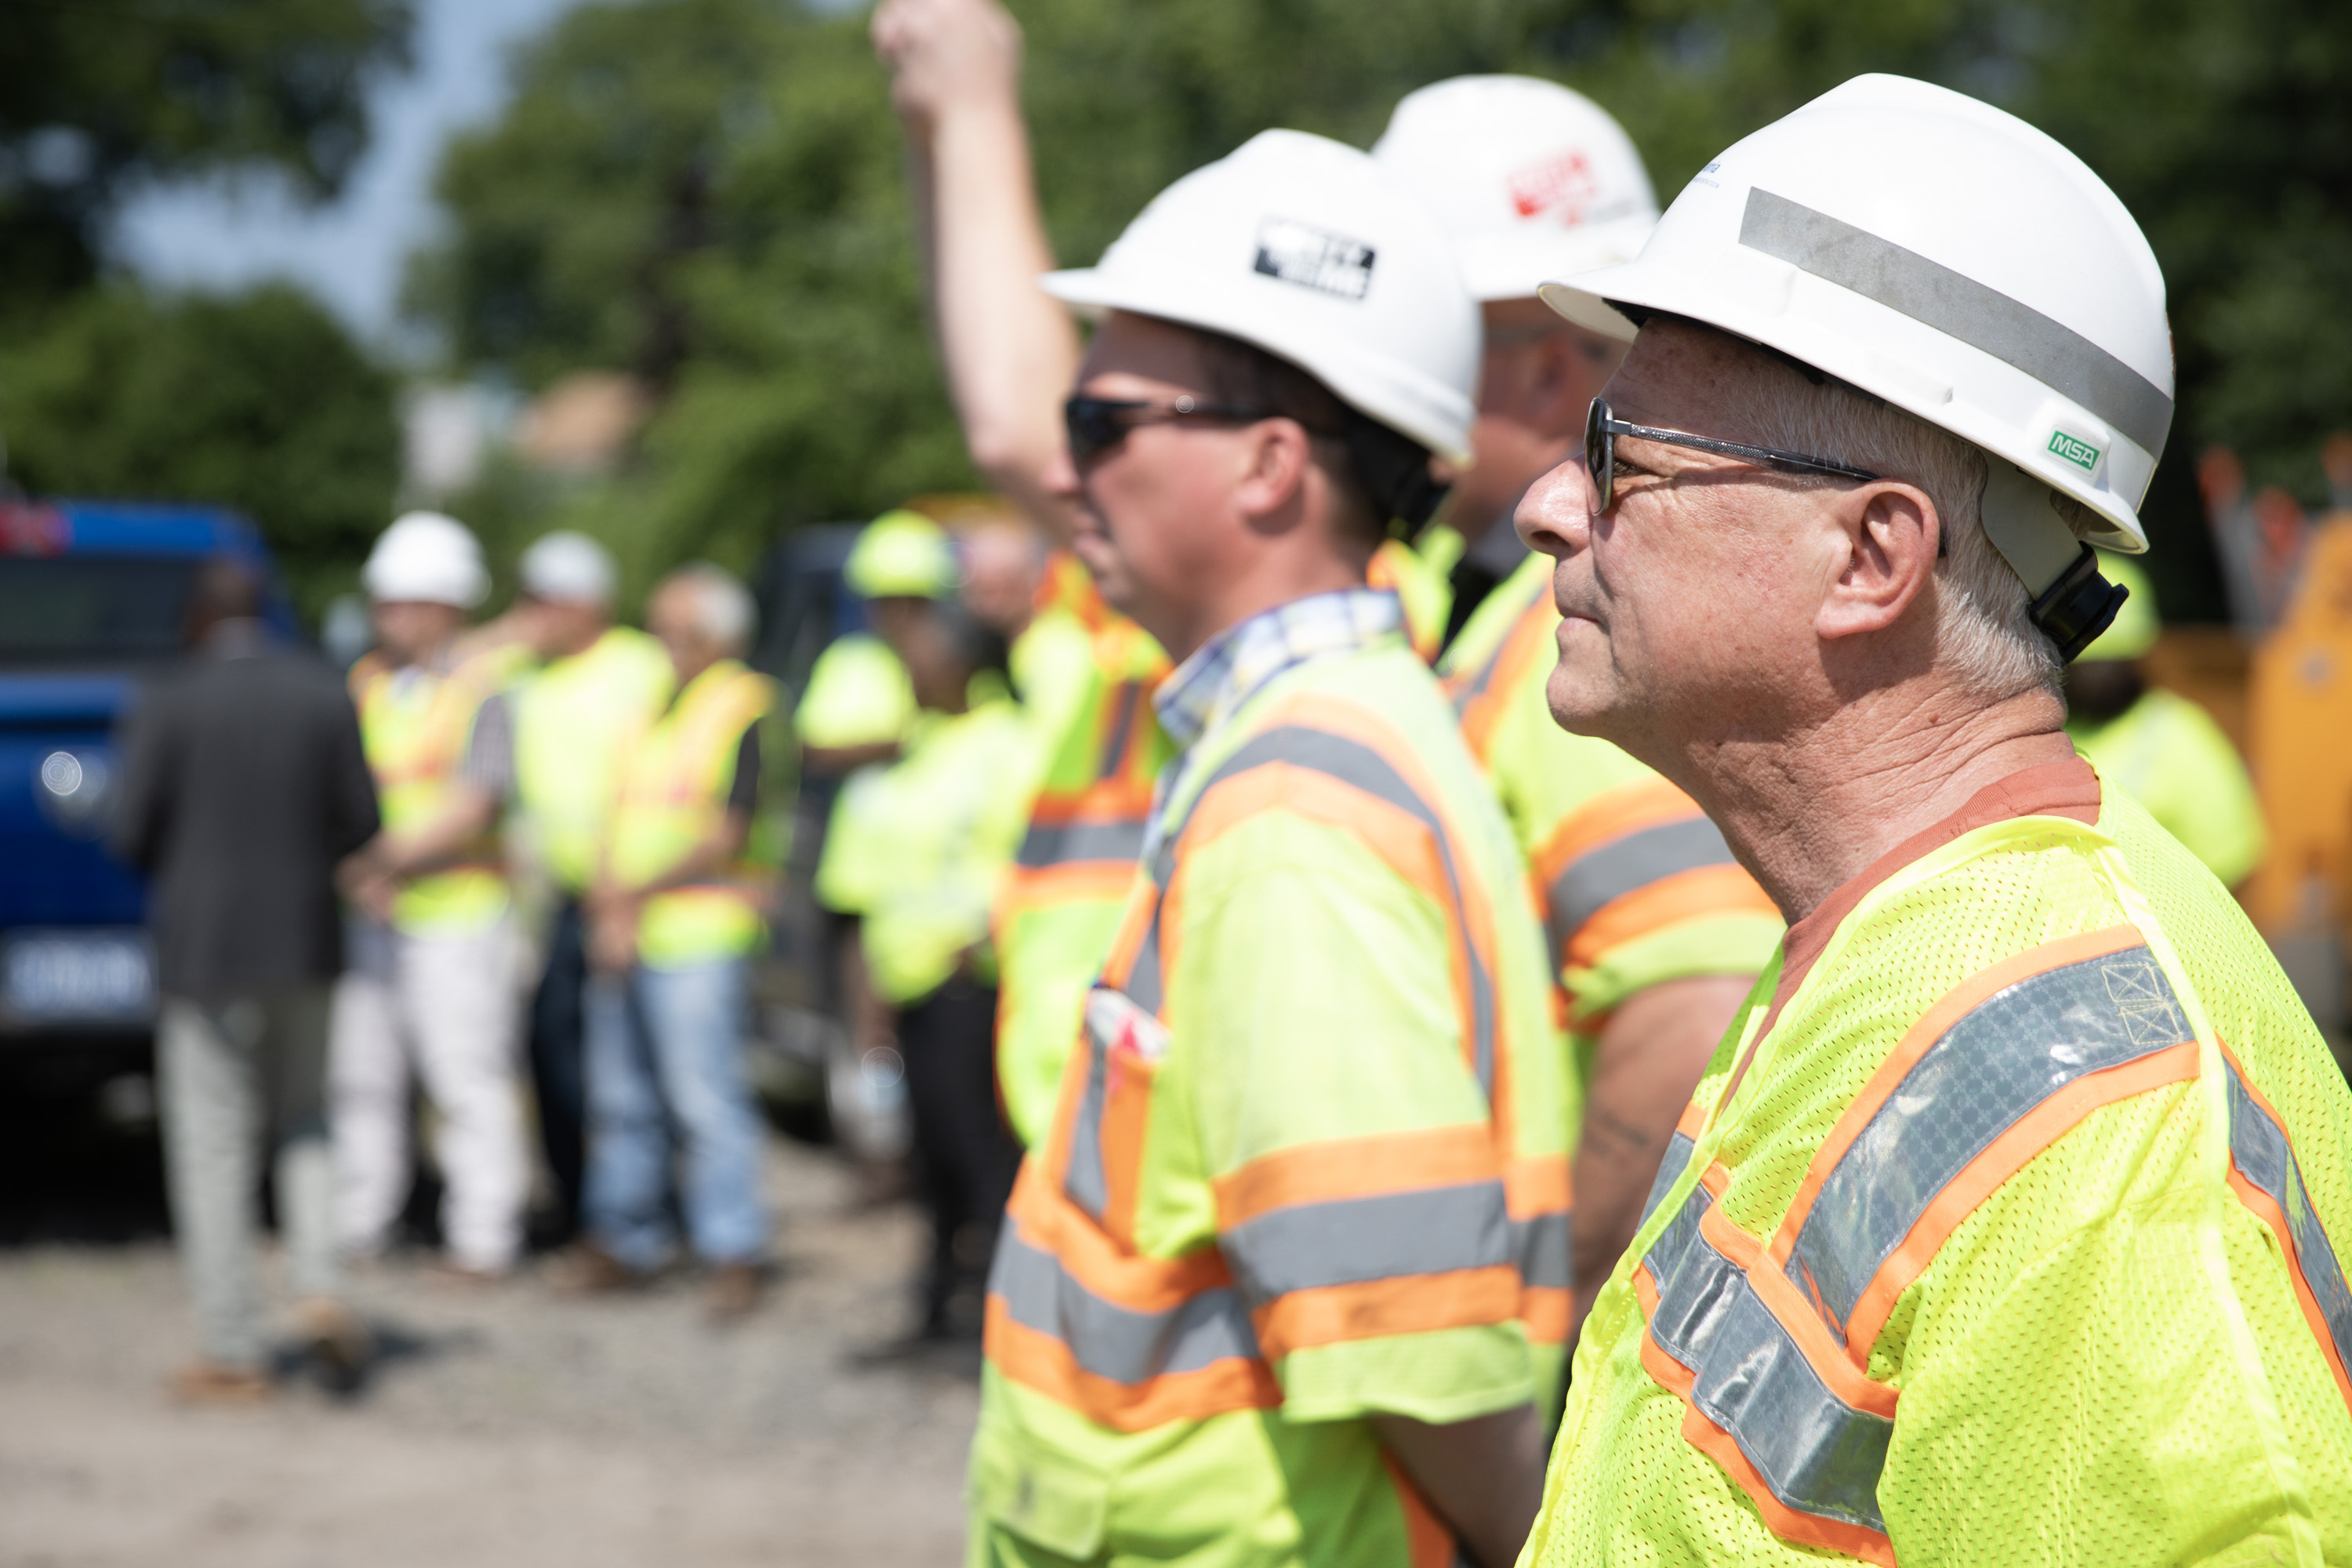 Workers with white hard hats and yellow safety vests standing in line during a training